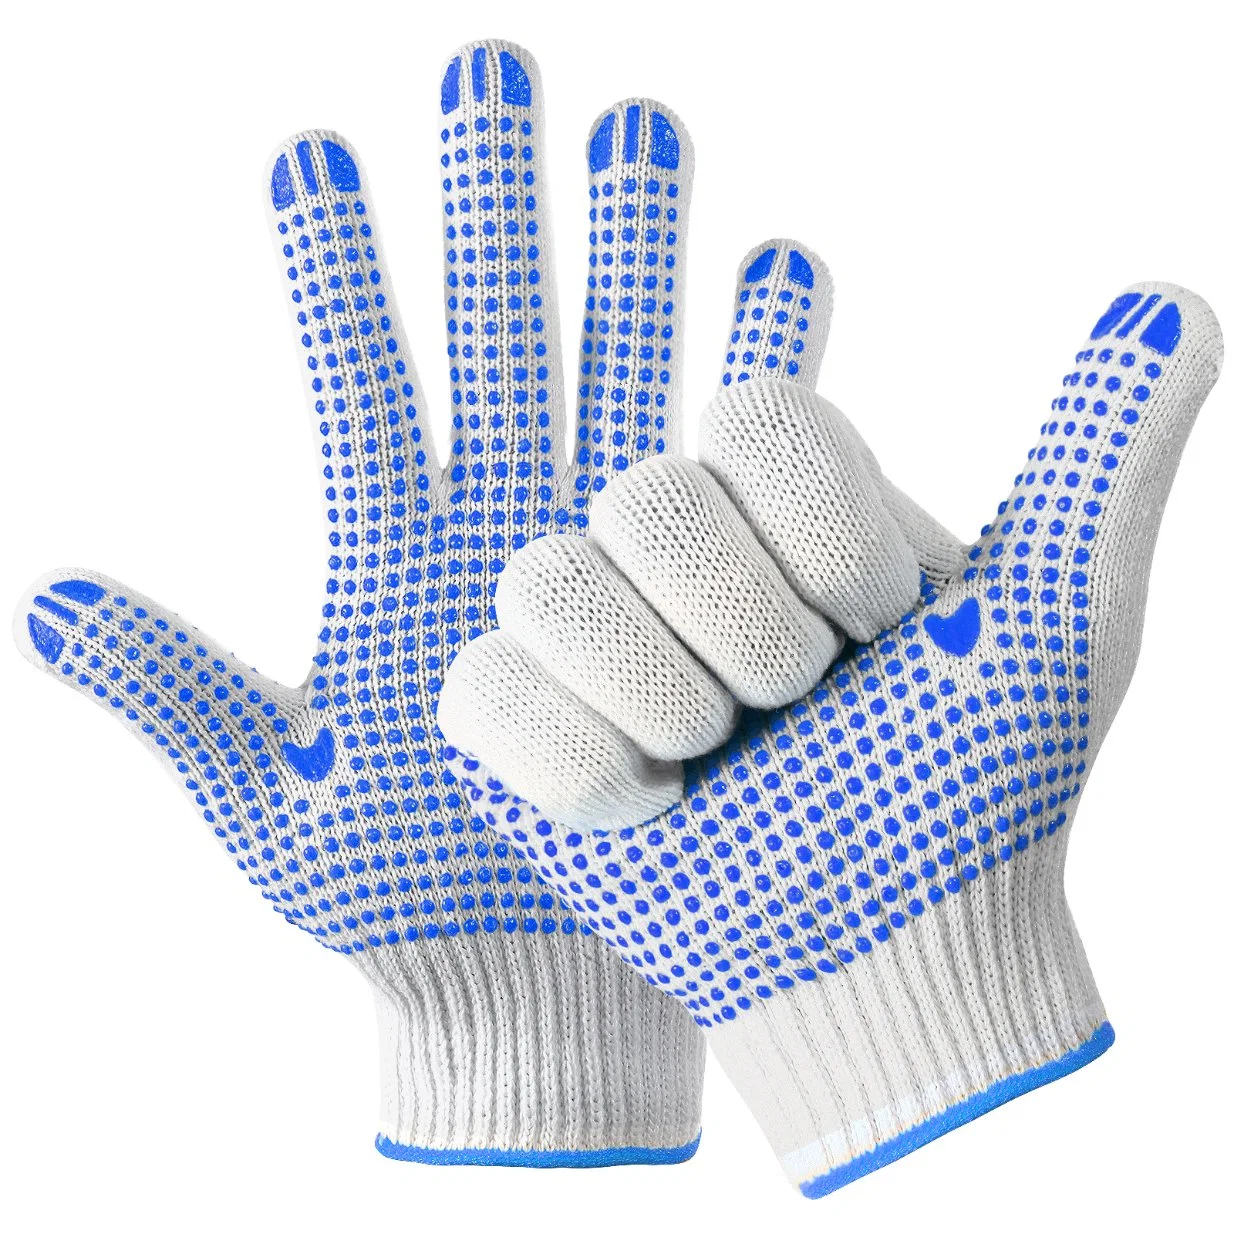 China Wholesale/Supplier PVC Dotted/Dots Safety/Work/Labor Glove Industrial/Construction/Working Guantes Cotton Knitted Gloves